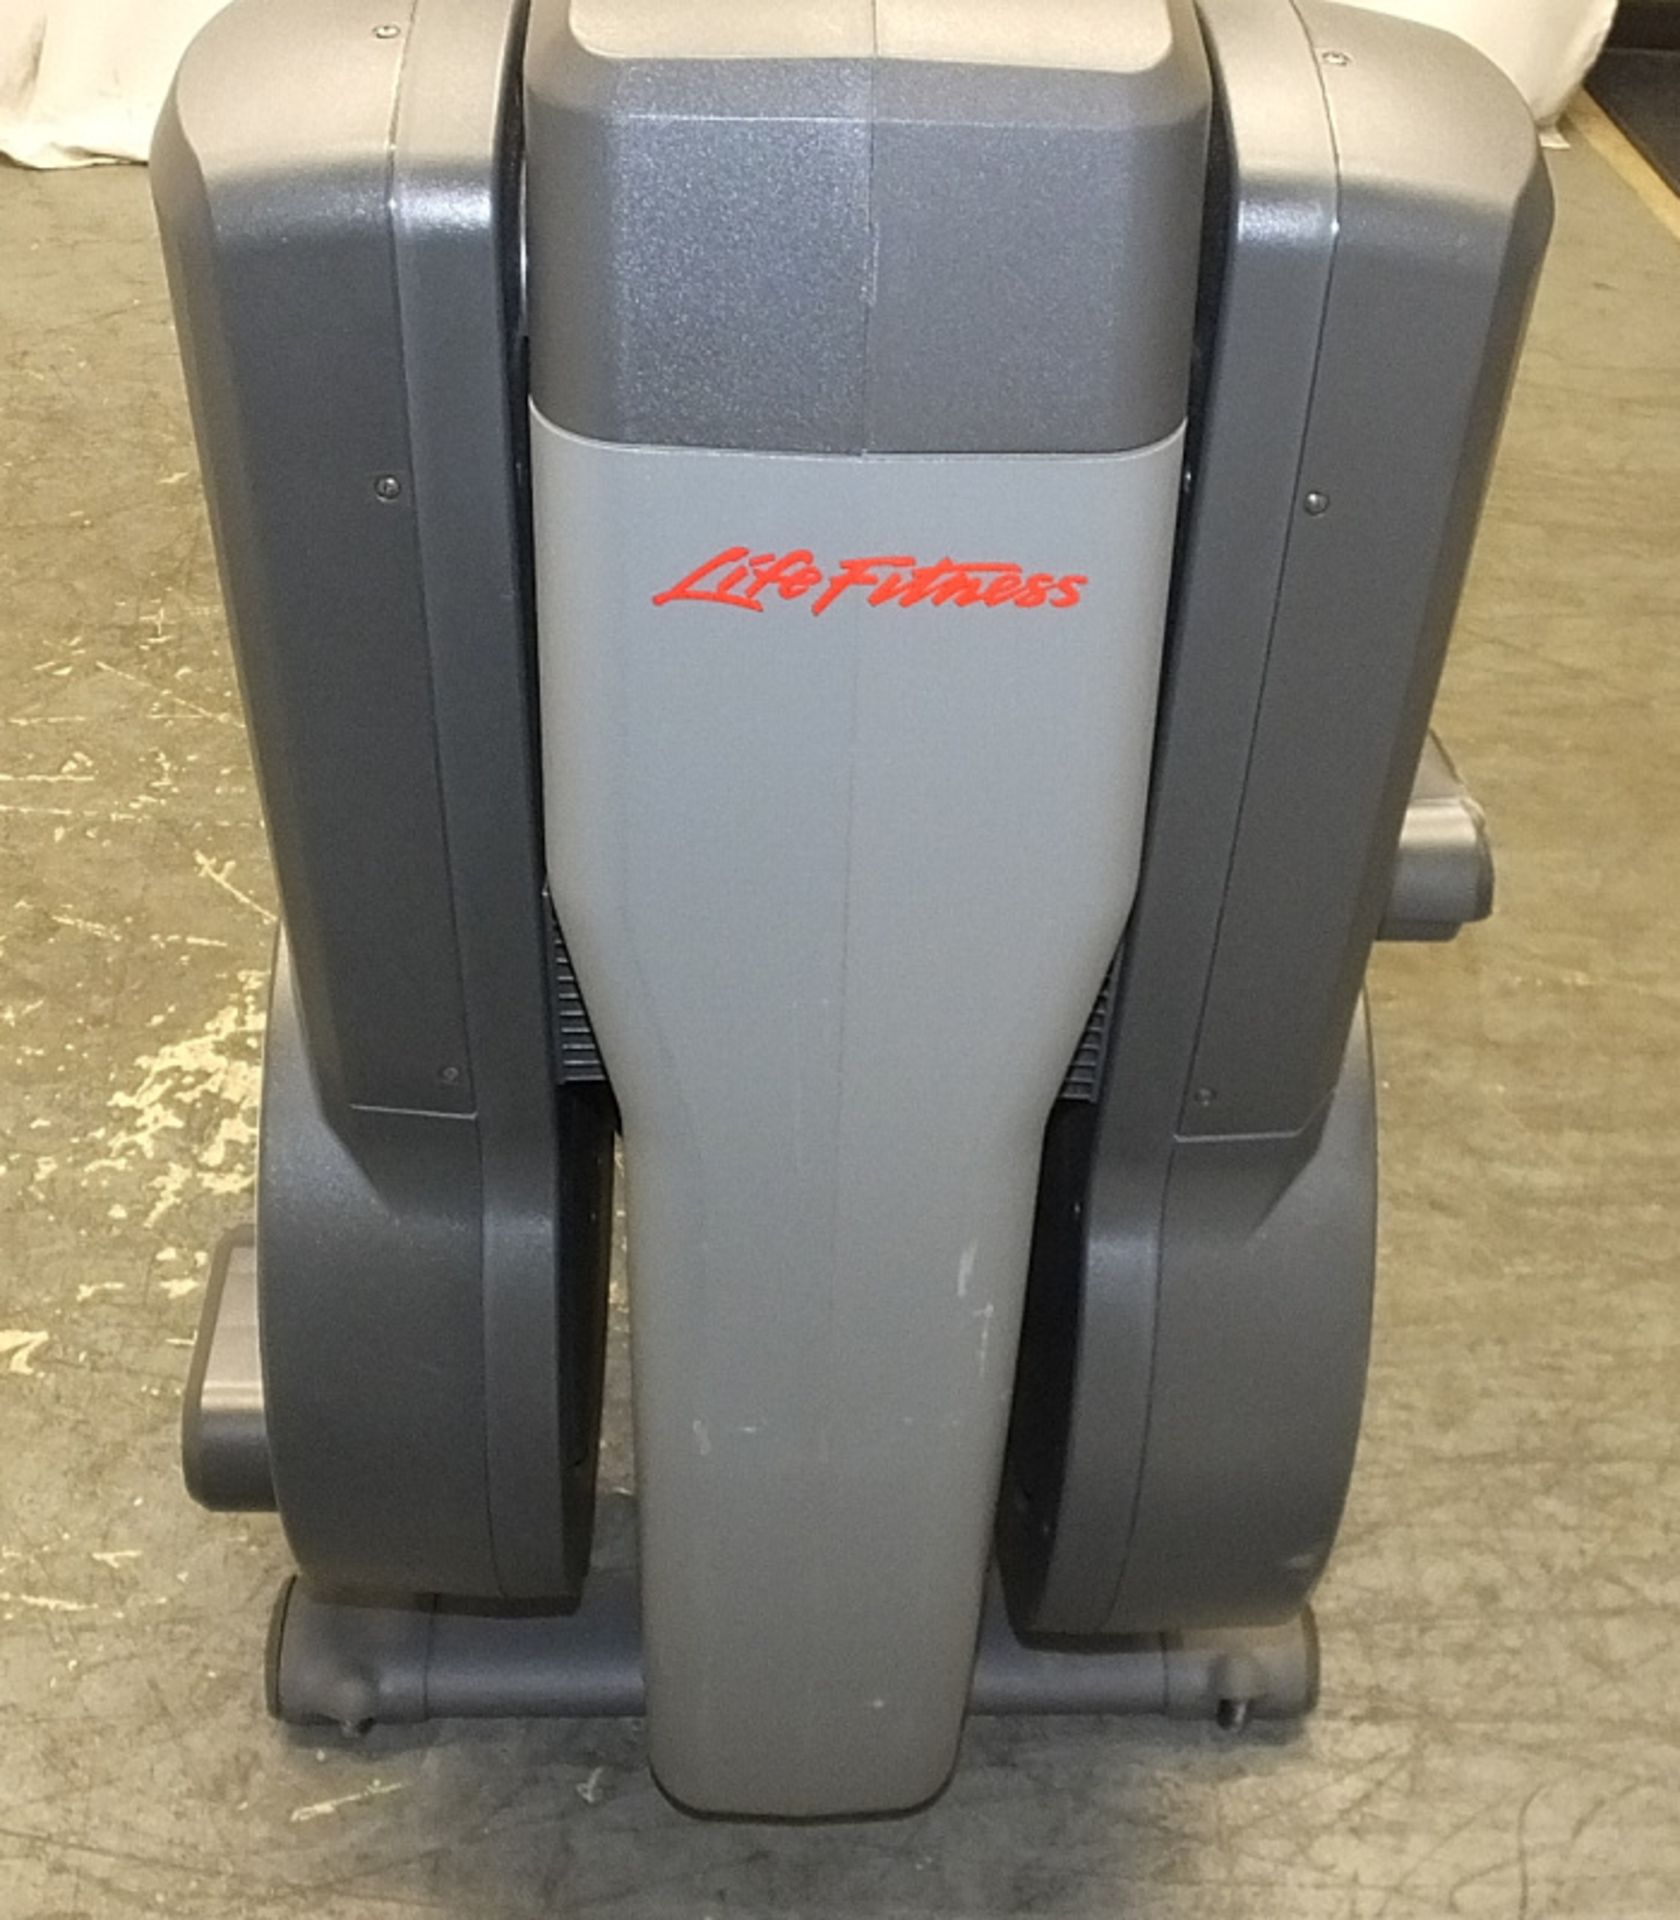 Life Fitness 95x Elliptical Cross Trainer - Badly damaged to right arm section as seen in - Image 9 of 17